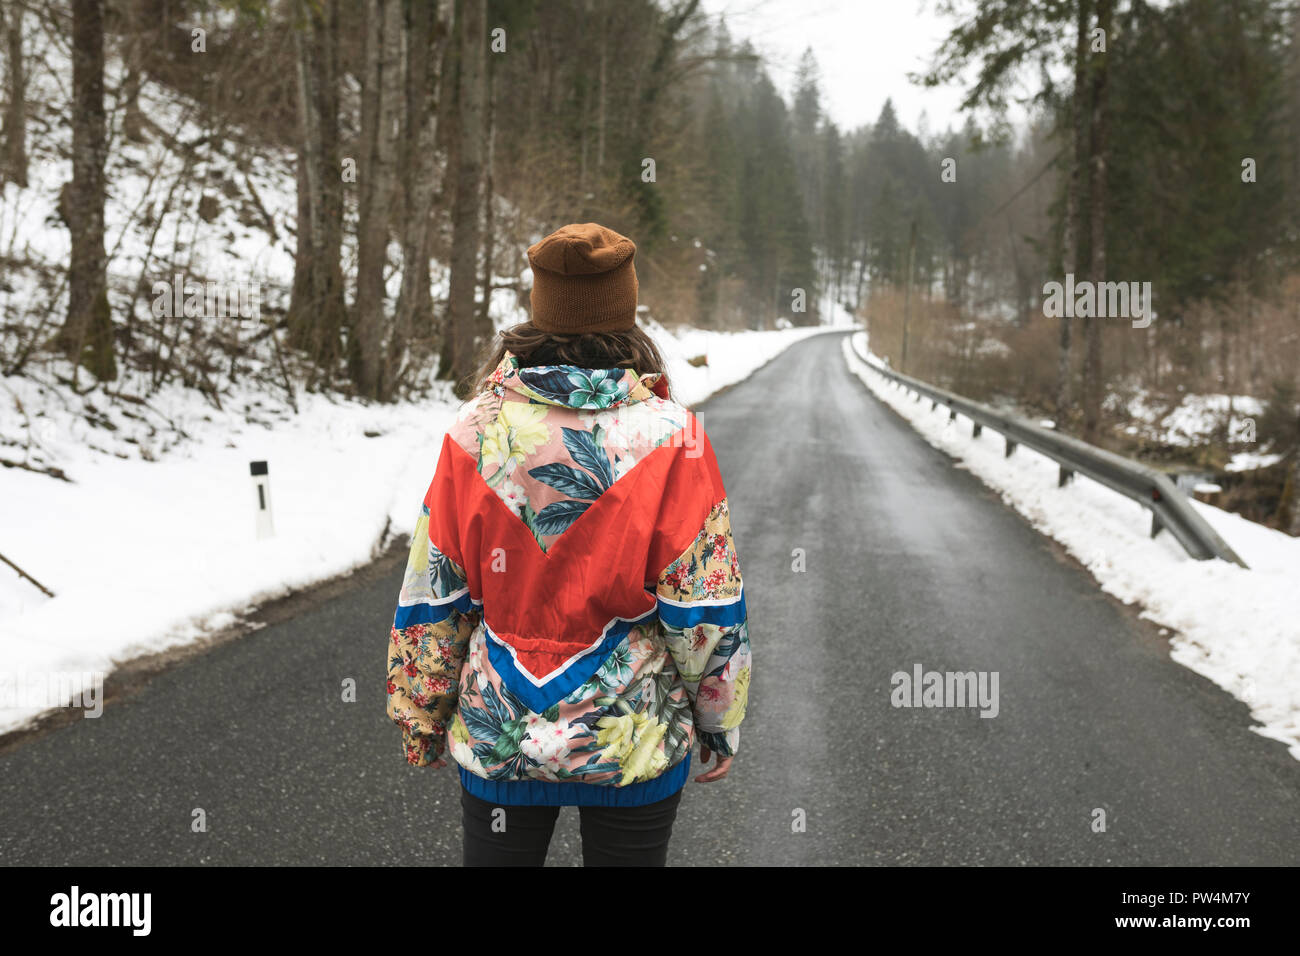 Rear view of woman wearing warm clothing standing on country road amidst trees in forest during winter Stock Photo